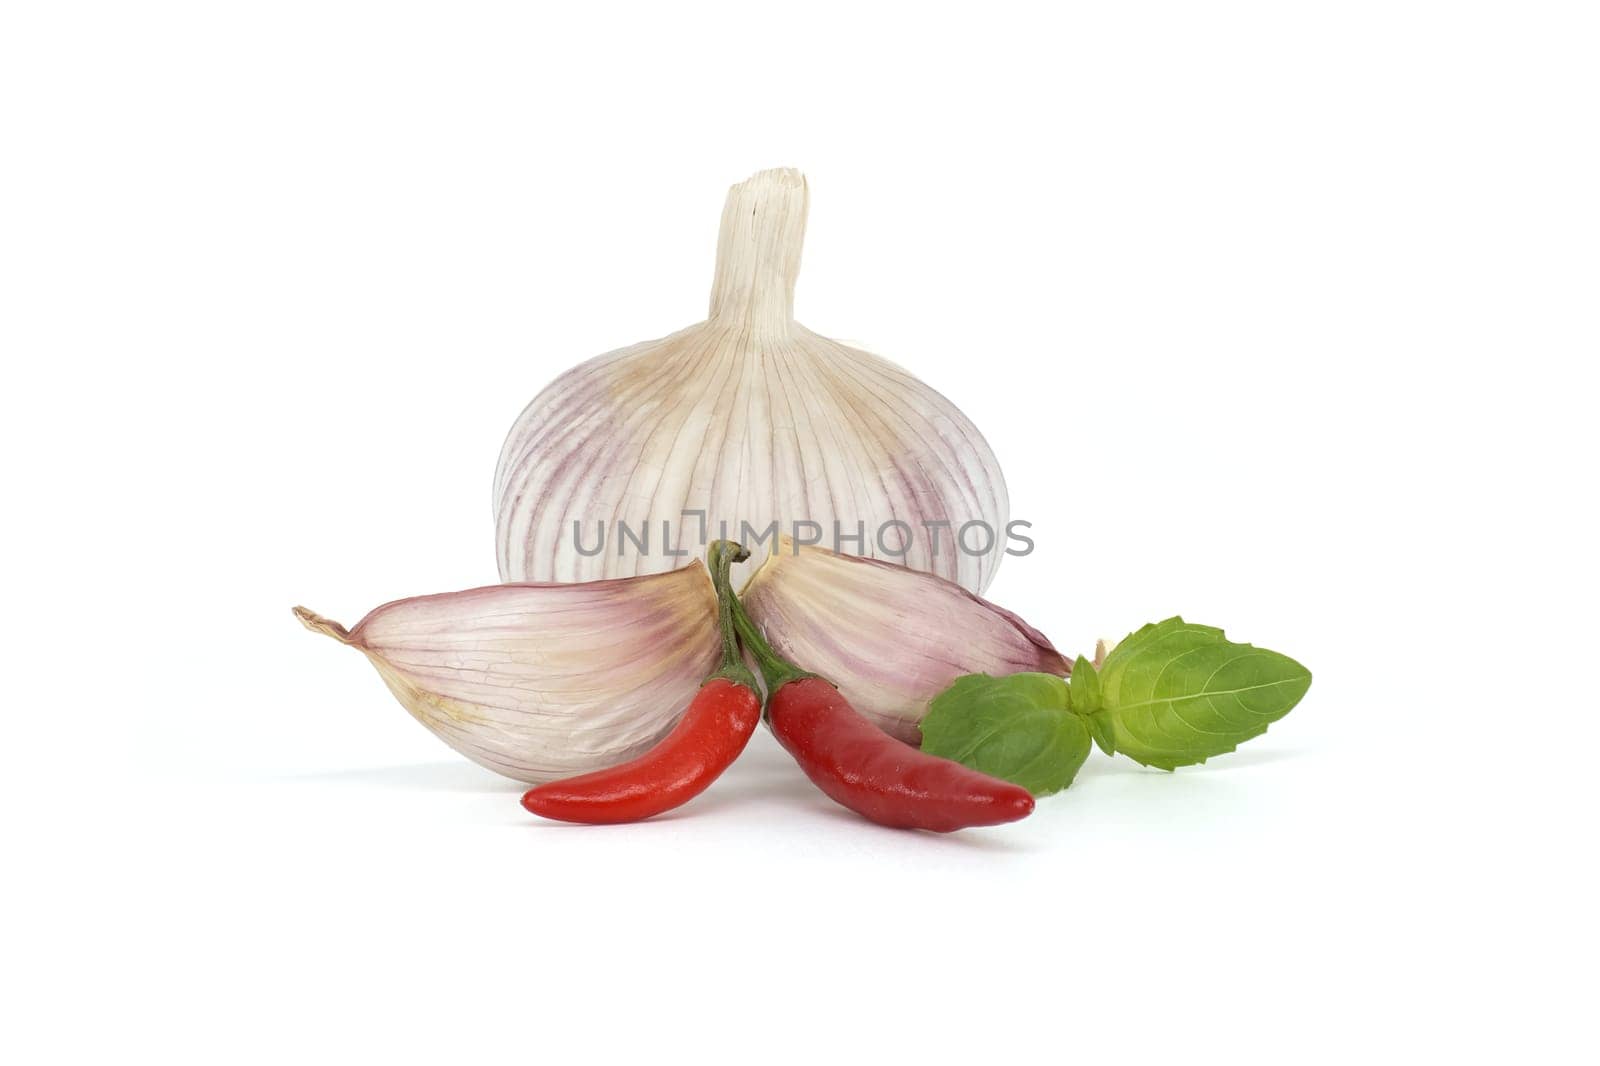 Whole garlic bulb with two garlic cloves nearby two red chili peppers, accompanied by a sprig of basil leaves isolated on white background